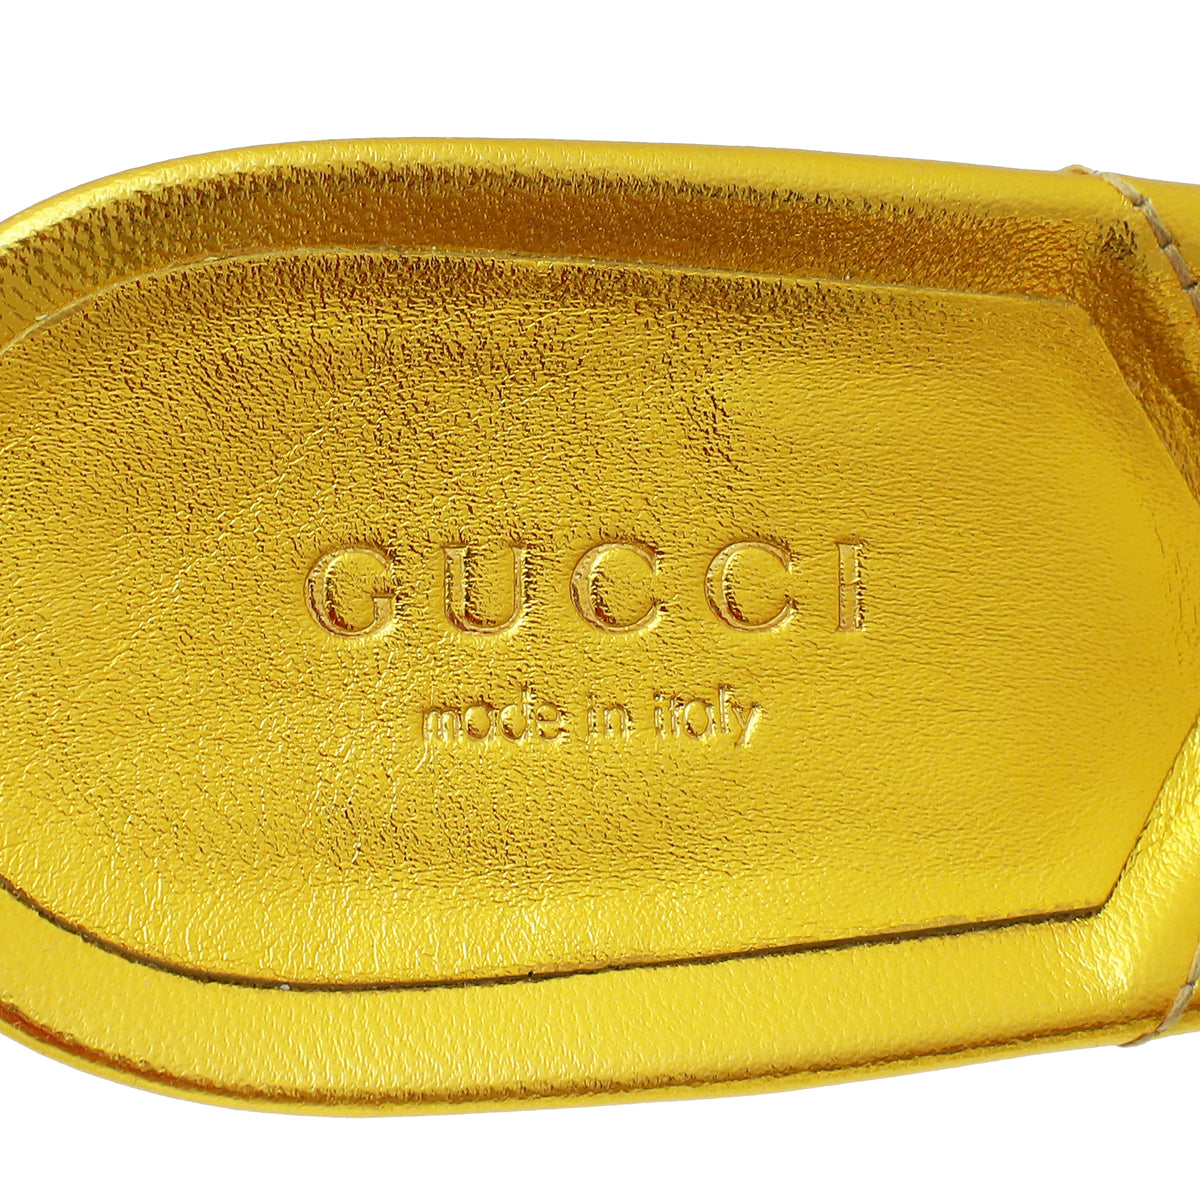 Gucci Gold GG Crystal Marmont Slide Mules Sandal 36